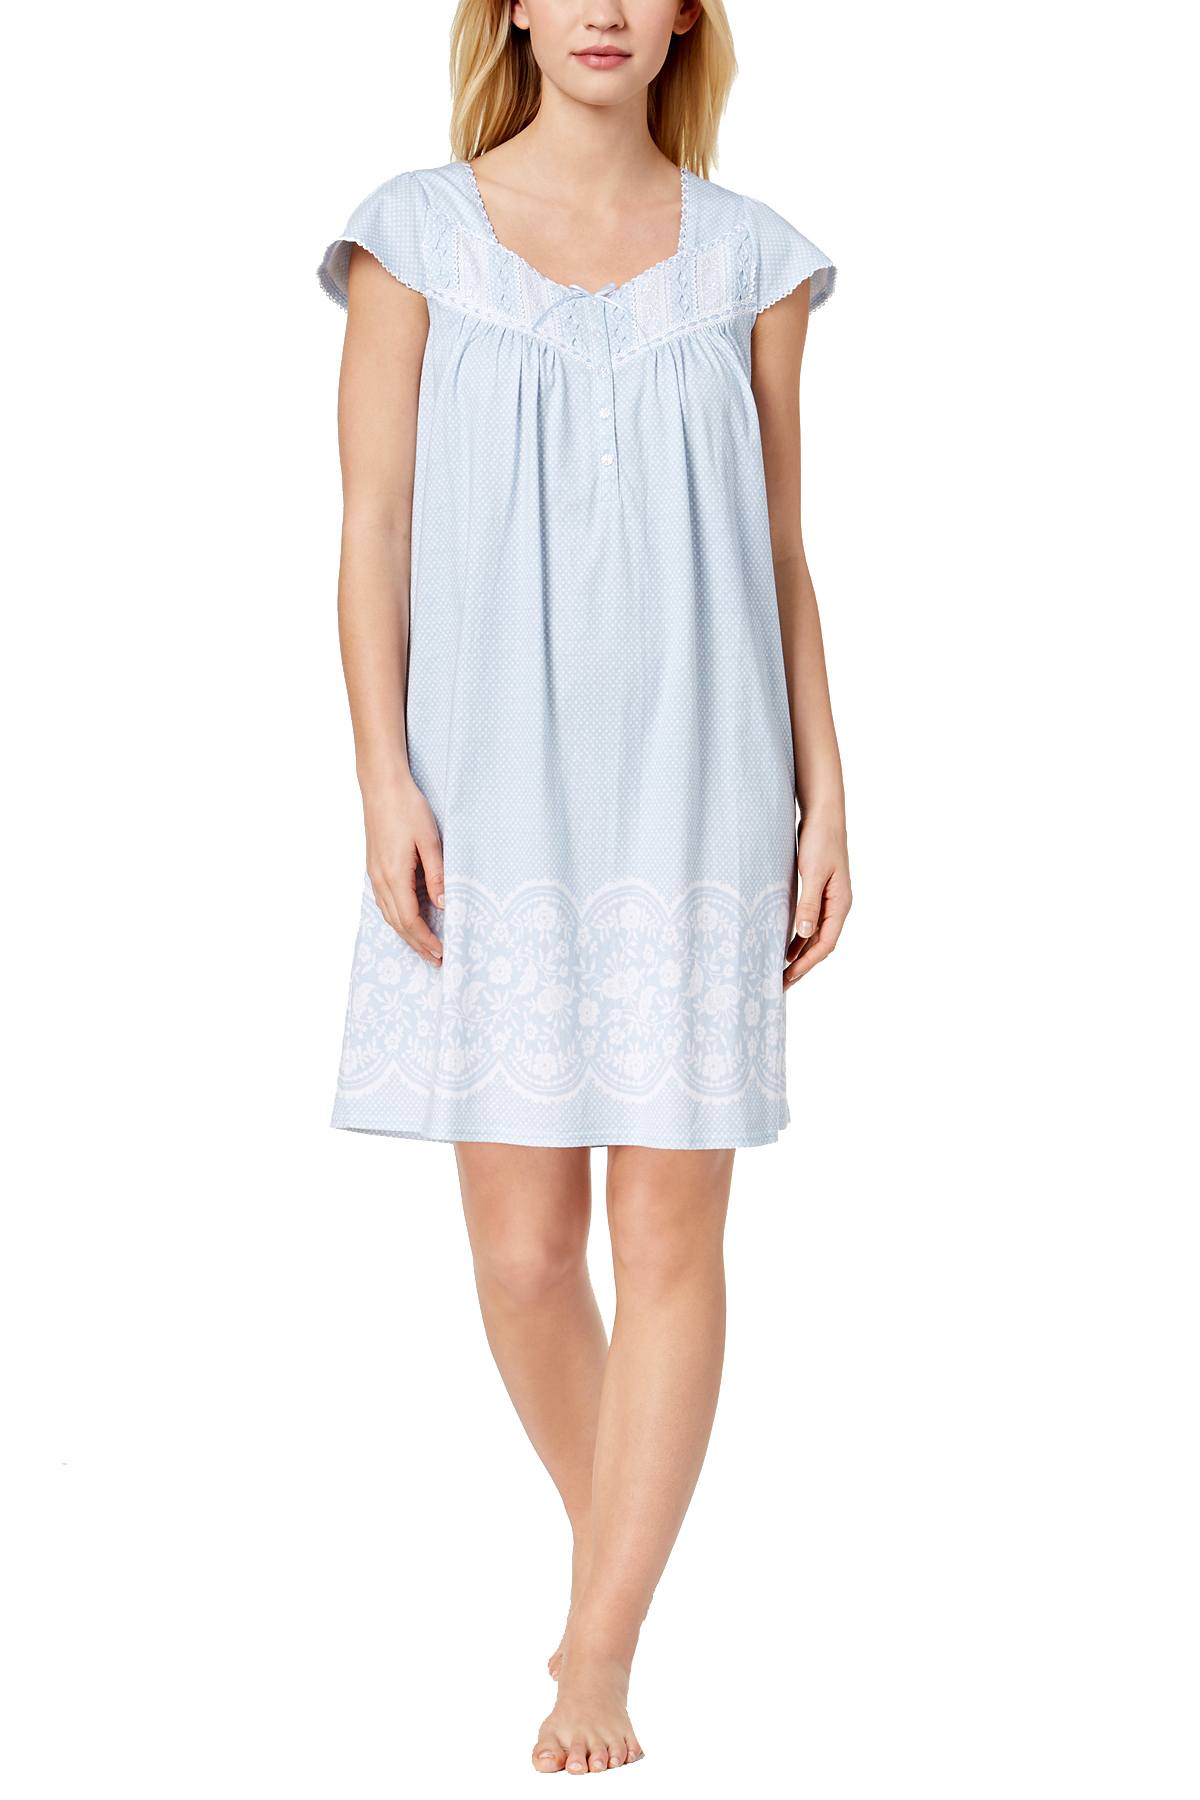 Charter Club Intimates Blue-Dots Embroidered Cotton Nightgown